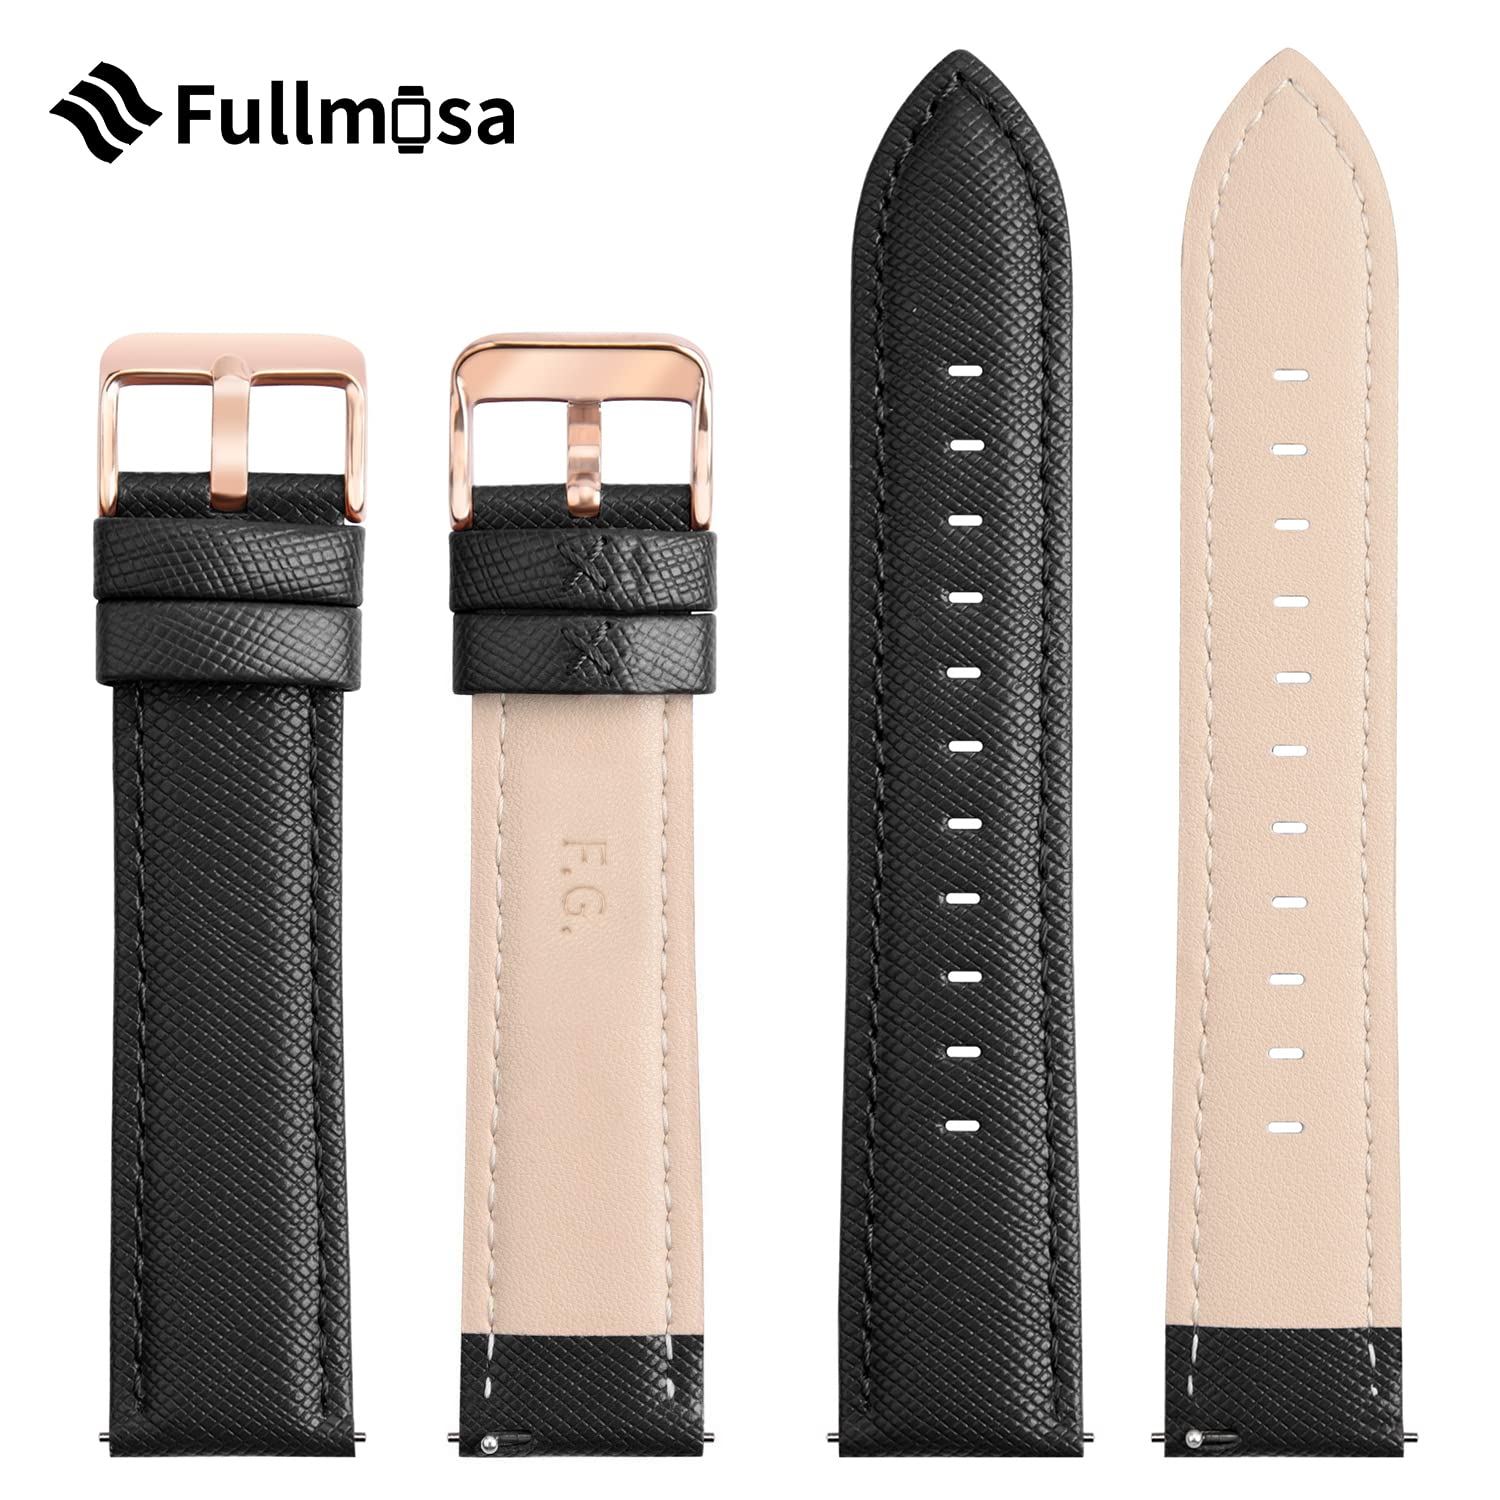 Fullmosa Cross Genuine Leather Watch Band 14mm 16mm 18mm 20mm 22mm 24mm, Quick Release Strap for Men and Women, Fits Samsung Galaxy Watch 5/4/3,Garmin Watch,Huawei,Fossil,Seiko,Citizen,Ticwatch